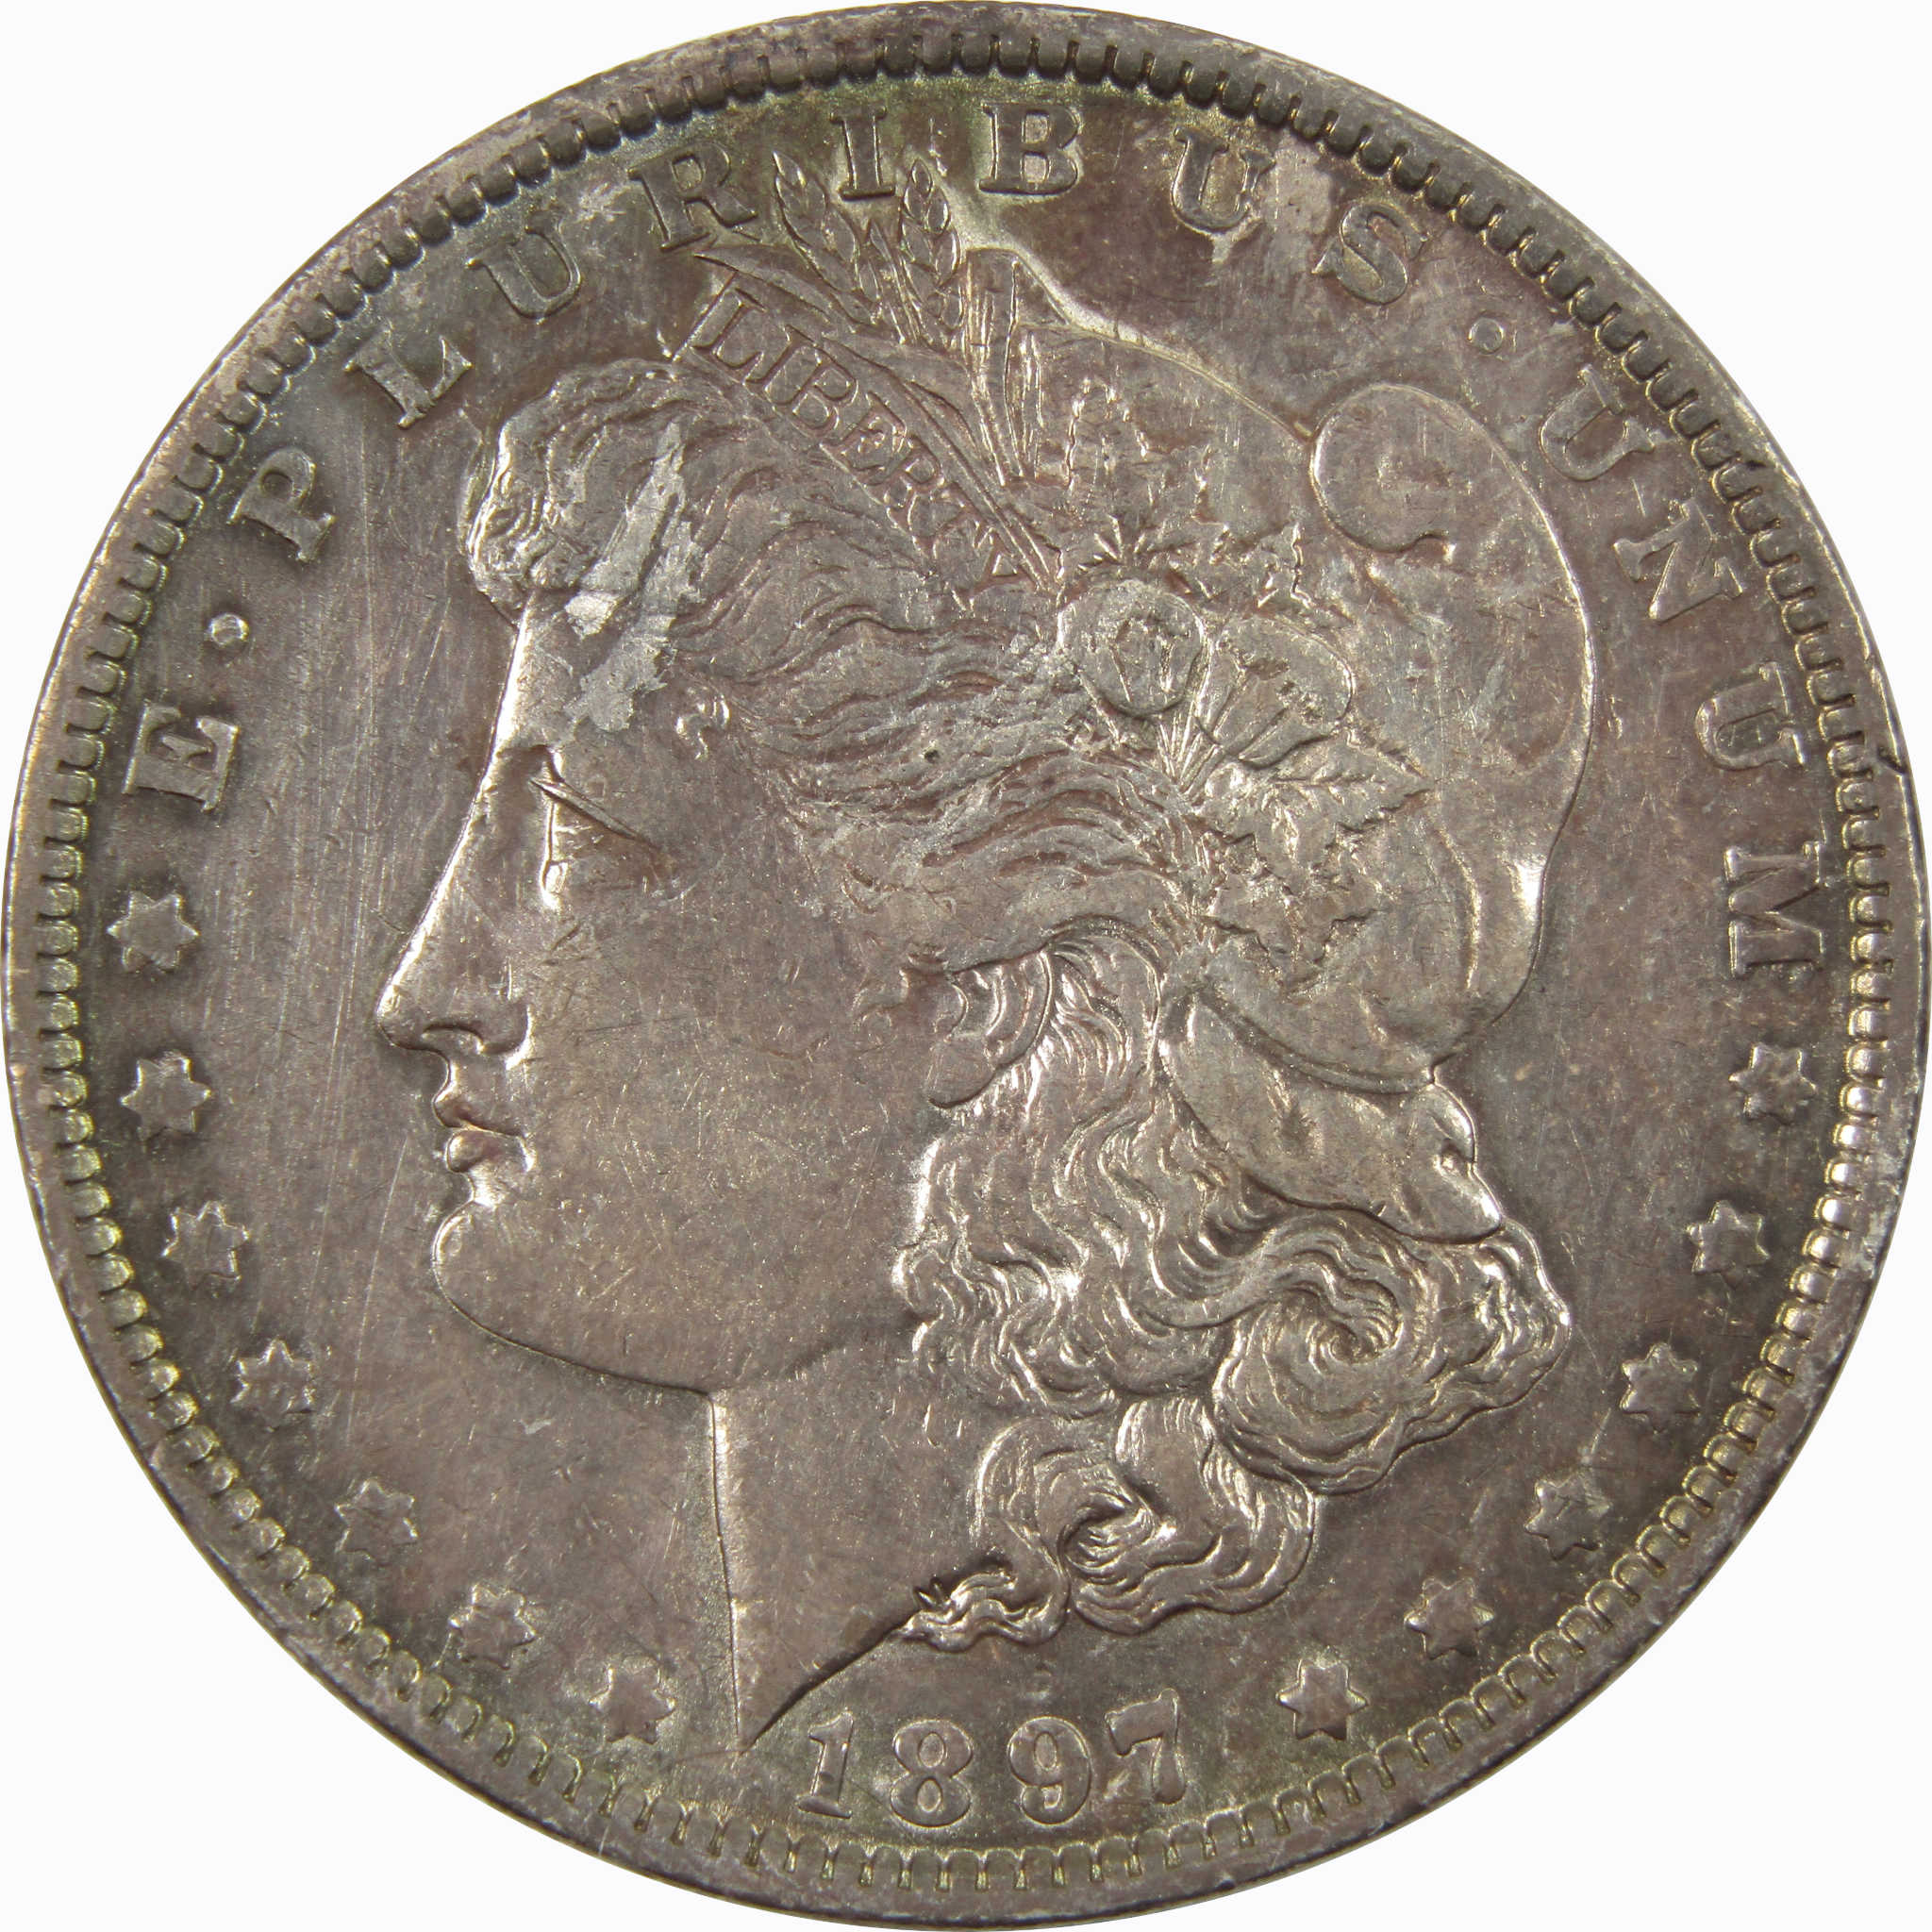 1897 O Morgan Dollar XF EF Extremely Fine 90% Silver $1 Coin SKU:I9410 - Morgan coin - Morgan silver dollar - Morgan silver dollar for sale - Profile Coins &amp; Collectibles